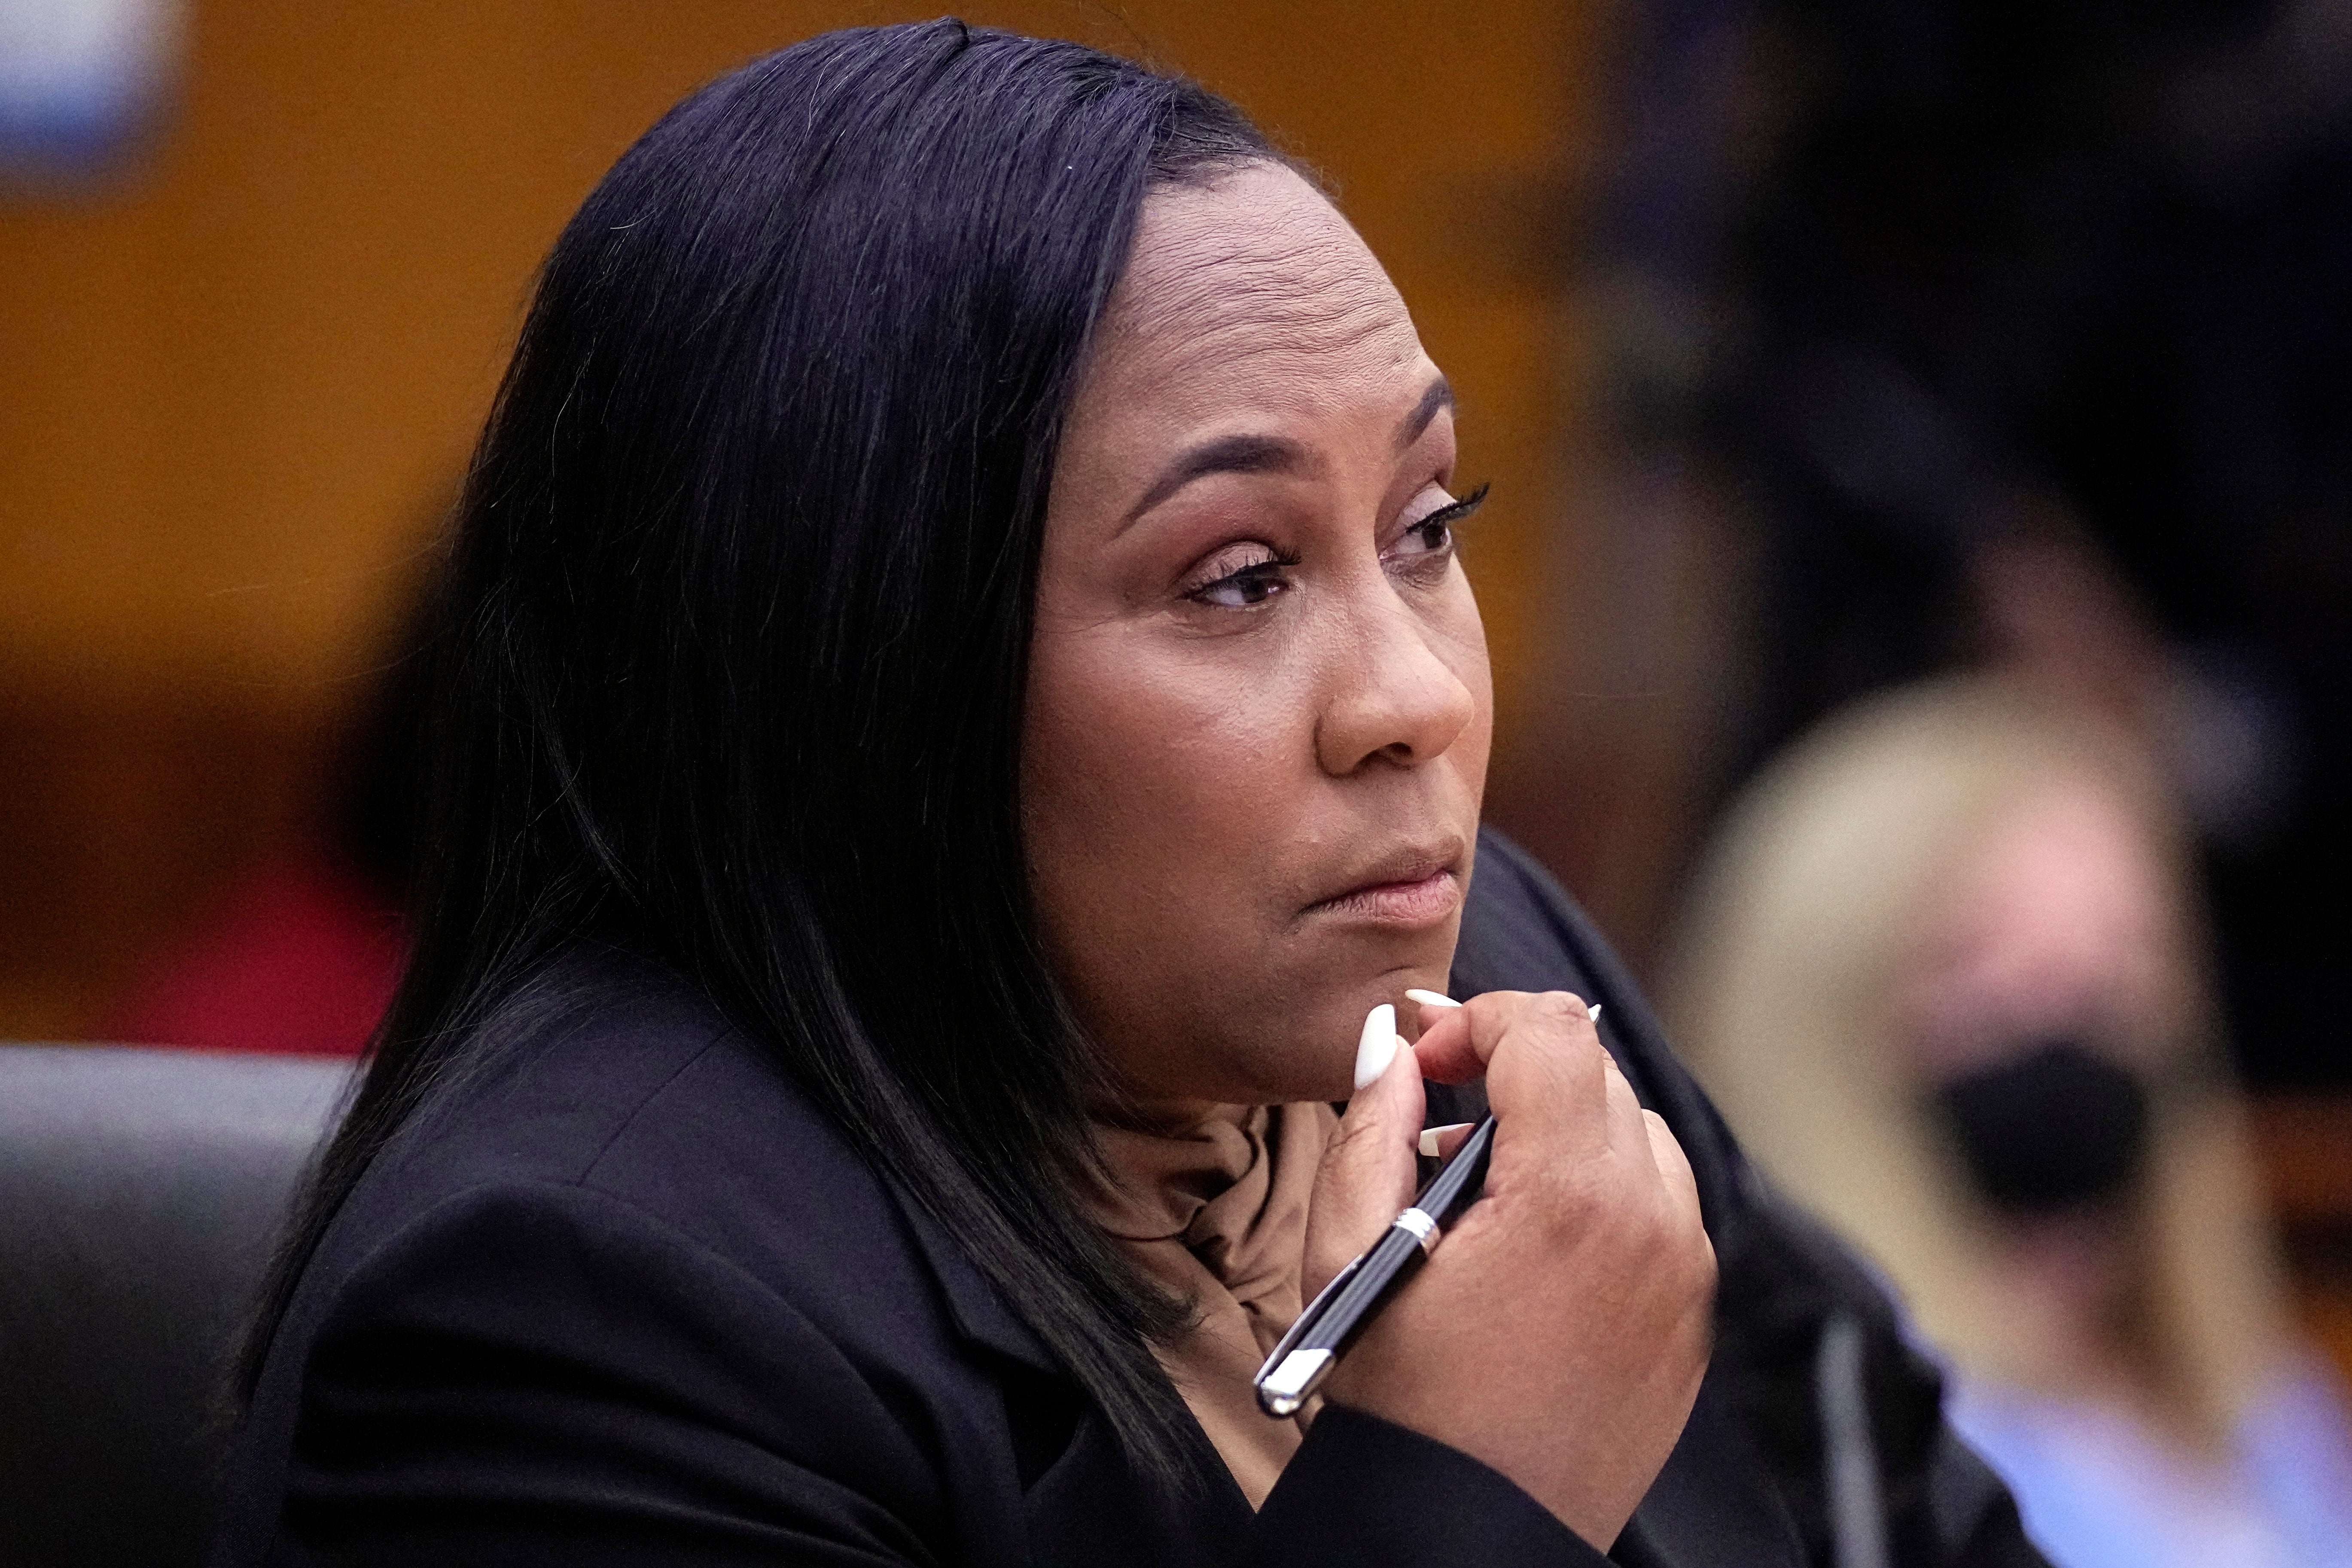 Fulton County District Attorney Fani Willis watches proceedings during a hearing to decide if the final report by a special grand jury looking into possible interference in the 2020 presidential election